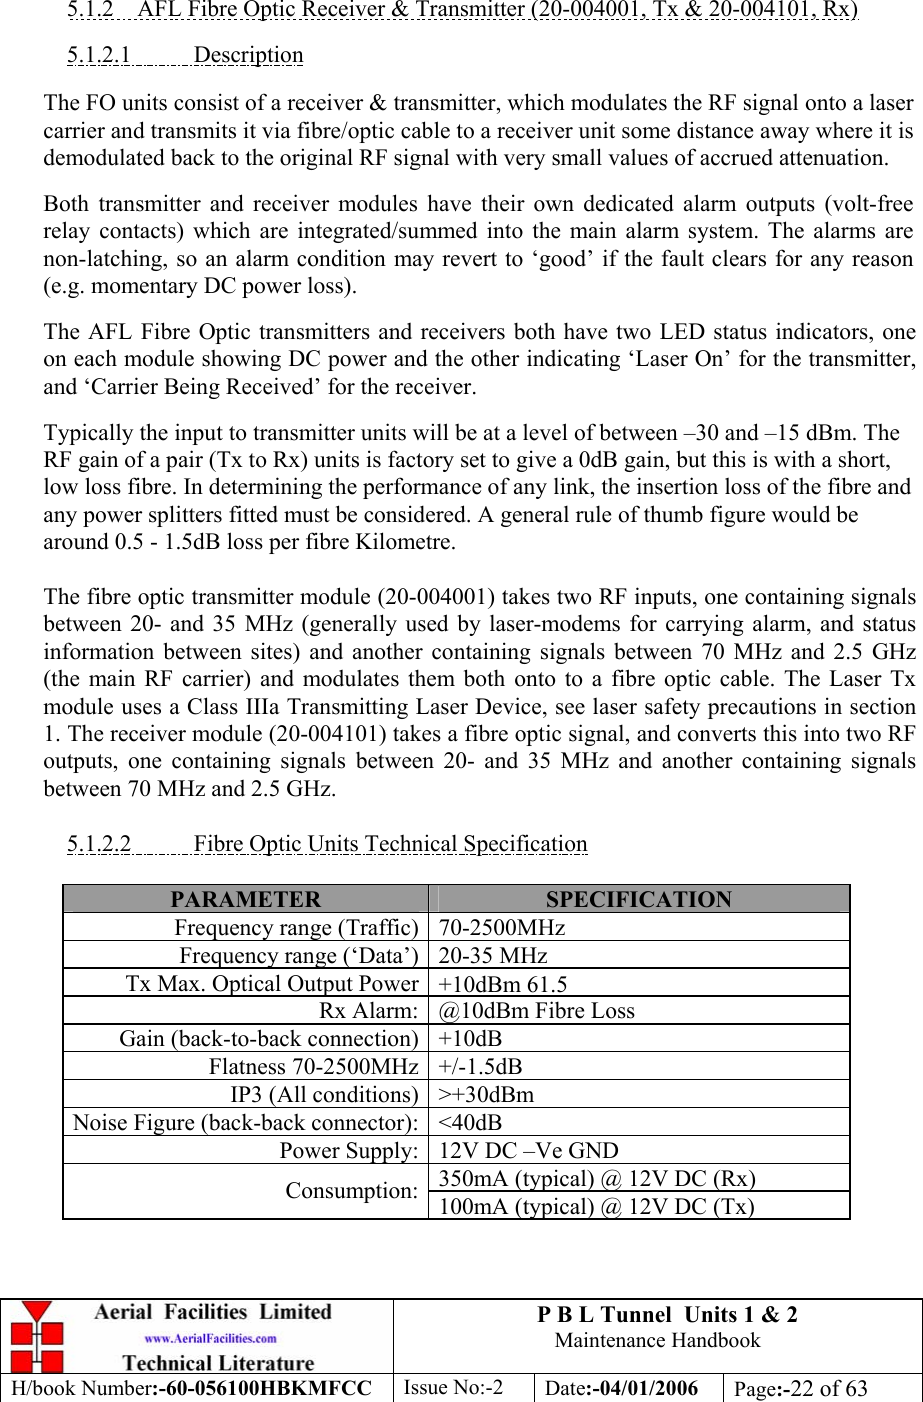 P B L Tunnel  Units 1 &amp; 2 Maintenance Handbook H/book Number:-60-056100HBKMFCC  Issue No:-2  Date:-04/01/2006  Page:-22 of 63   5.1.2  AFL Fibre Optic Receiver &amp; Transmitter (20-004001, Tx &amp; 20-004101, Rx)  5.1.2.1 Description  The FO units consist of a receiver &amp; transmitter, which modulates the RF signal onto a laser carrier and transmits it via fibre/optic cable to a receiver unit some distance away where it is demodulated back to the original RF signal with very small values of accrued attenuation.  Both transmitter and receiver modules have their own dedicated alarm outputs (volt-free relay contacts) which are integrated/summed into the main alarm system. The alarms are non-latching, so an alarm condition may revert to ‘good’ if the fault clears for any reason (e.g. momentary DC power loss).  The AFL Fibre Optic transmitters and receivers both have two LED status indicators, one on each module showing DC power and the other indicating ‘Laser On’ for the transmitter, and ‘Carrier Being Received’ for the receiver.  Typically the input to transmitter units will be at a level of between –30 and –15 dBm. The RF gain of a pair (Tx to Rx) units is factory set to give a 0dB gain, but this is with a short, low loss fibre. In determining the performance of any link, the insertion loss of the fibre and any power splitters fitted must be considered. A general rule of thumb figure would be around 0.5 - 1.5dB loss per fibre Kilometre.  The fibre optic transmitter module (20-004001) takes two RF inputs, one containing signals between 20- and 35 MHz (generally used by laser-modems for carrying alarm, and status information between sites) and another containing signals between 70 MHz and 2.5 GHz (the main RF carrier) and modulates them both onto to a fibre optic cable. The Laser Tx module uses a Class IIIa Transmitting Laser Device, see laser safety precautions in section 1. The receiver module (20-004101) takes a fibre optic signal, and converts this into two RF outputs, one containing signals between 20- and 35 MHz and another containing signals between 70 MHz and 2.5 GHz.  5.1.2.2  Fibre Optic Units Technical Specification  PARAMETER SPECIFICATION Frequency range (Traffic)70-2500MHzFrequency range (‘Data’)20-35 MHzTx Max. Optical Output Power  +10dBm 61.5Rx Alarm:@10dBm Fibre LossGain (back-to-back connection)+10dBFlatness 70-2500MHz +/-1.5dBIP3 (All conditions)&gt;+30dBmNoise Figure (back-back connector): &lt;40dBPower Supply: 12V DC –Ve GND350mA (typical) @ 12V DC (Rx) Consumption: 100mA (typical) @ 12V DC (Tx) 